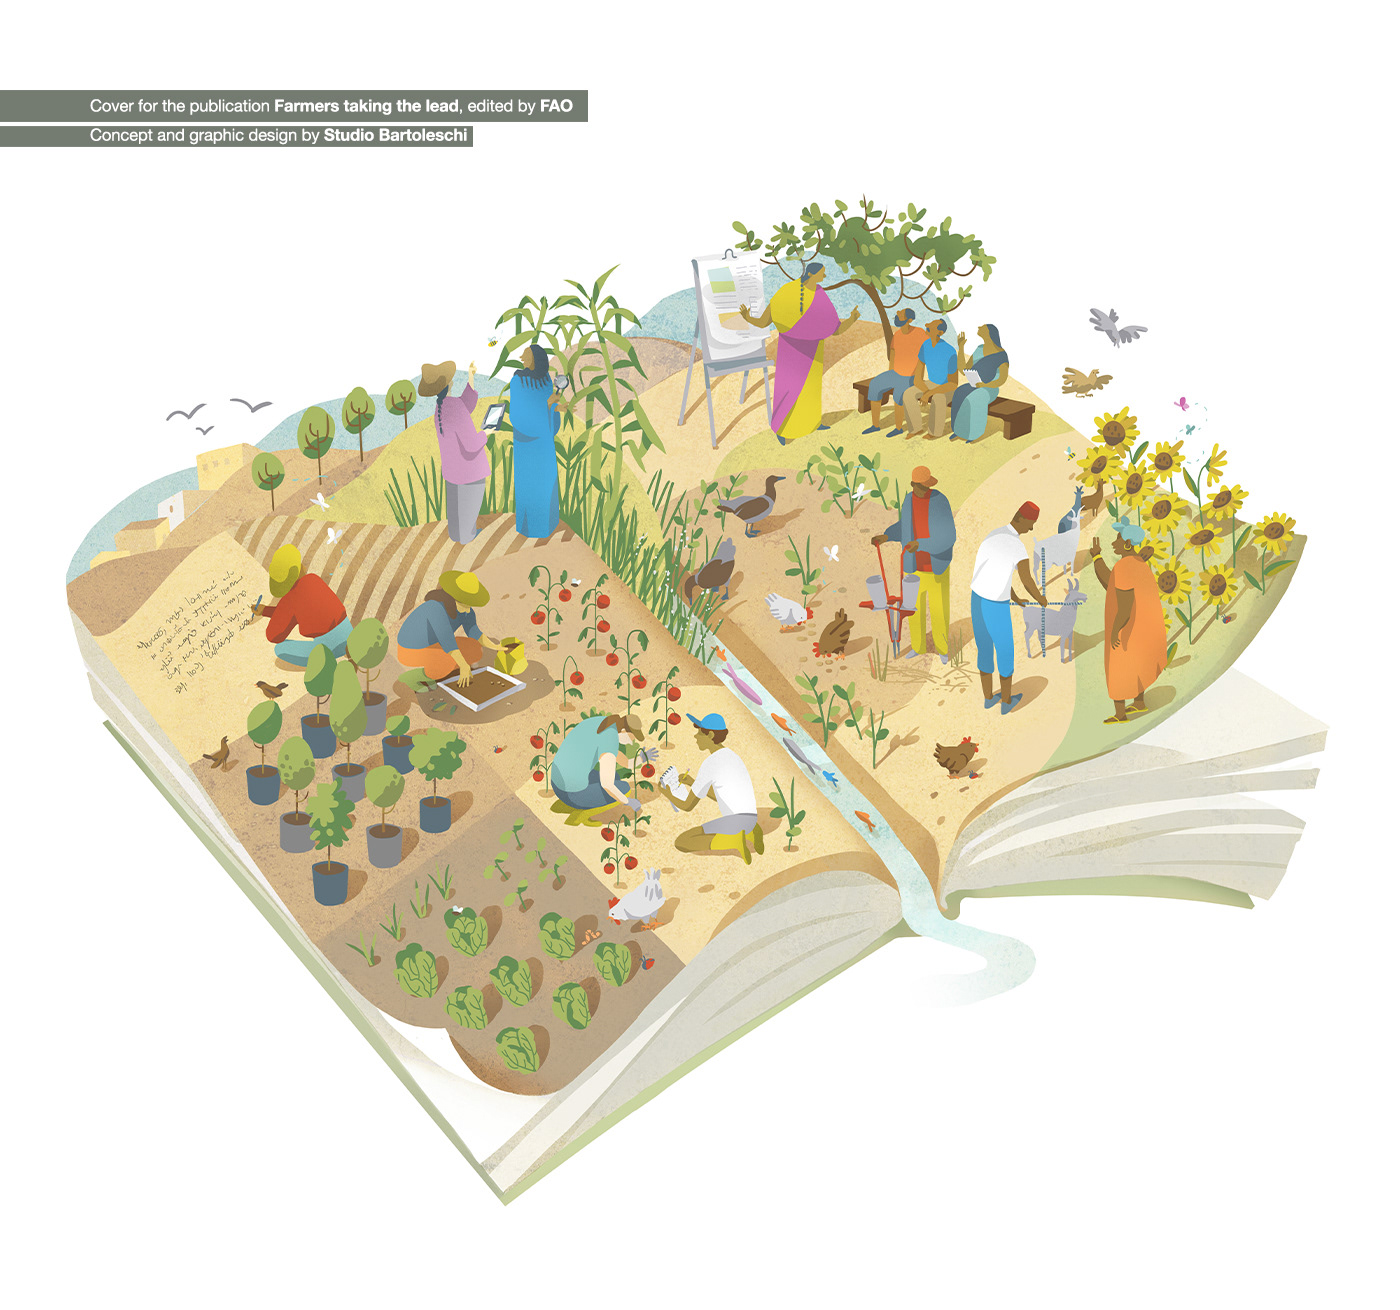 agriculture book cover fao ILLUSTRATION  Sustainable